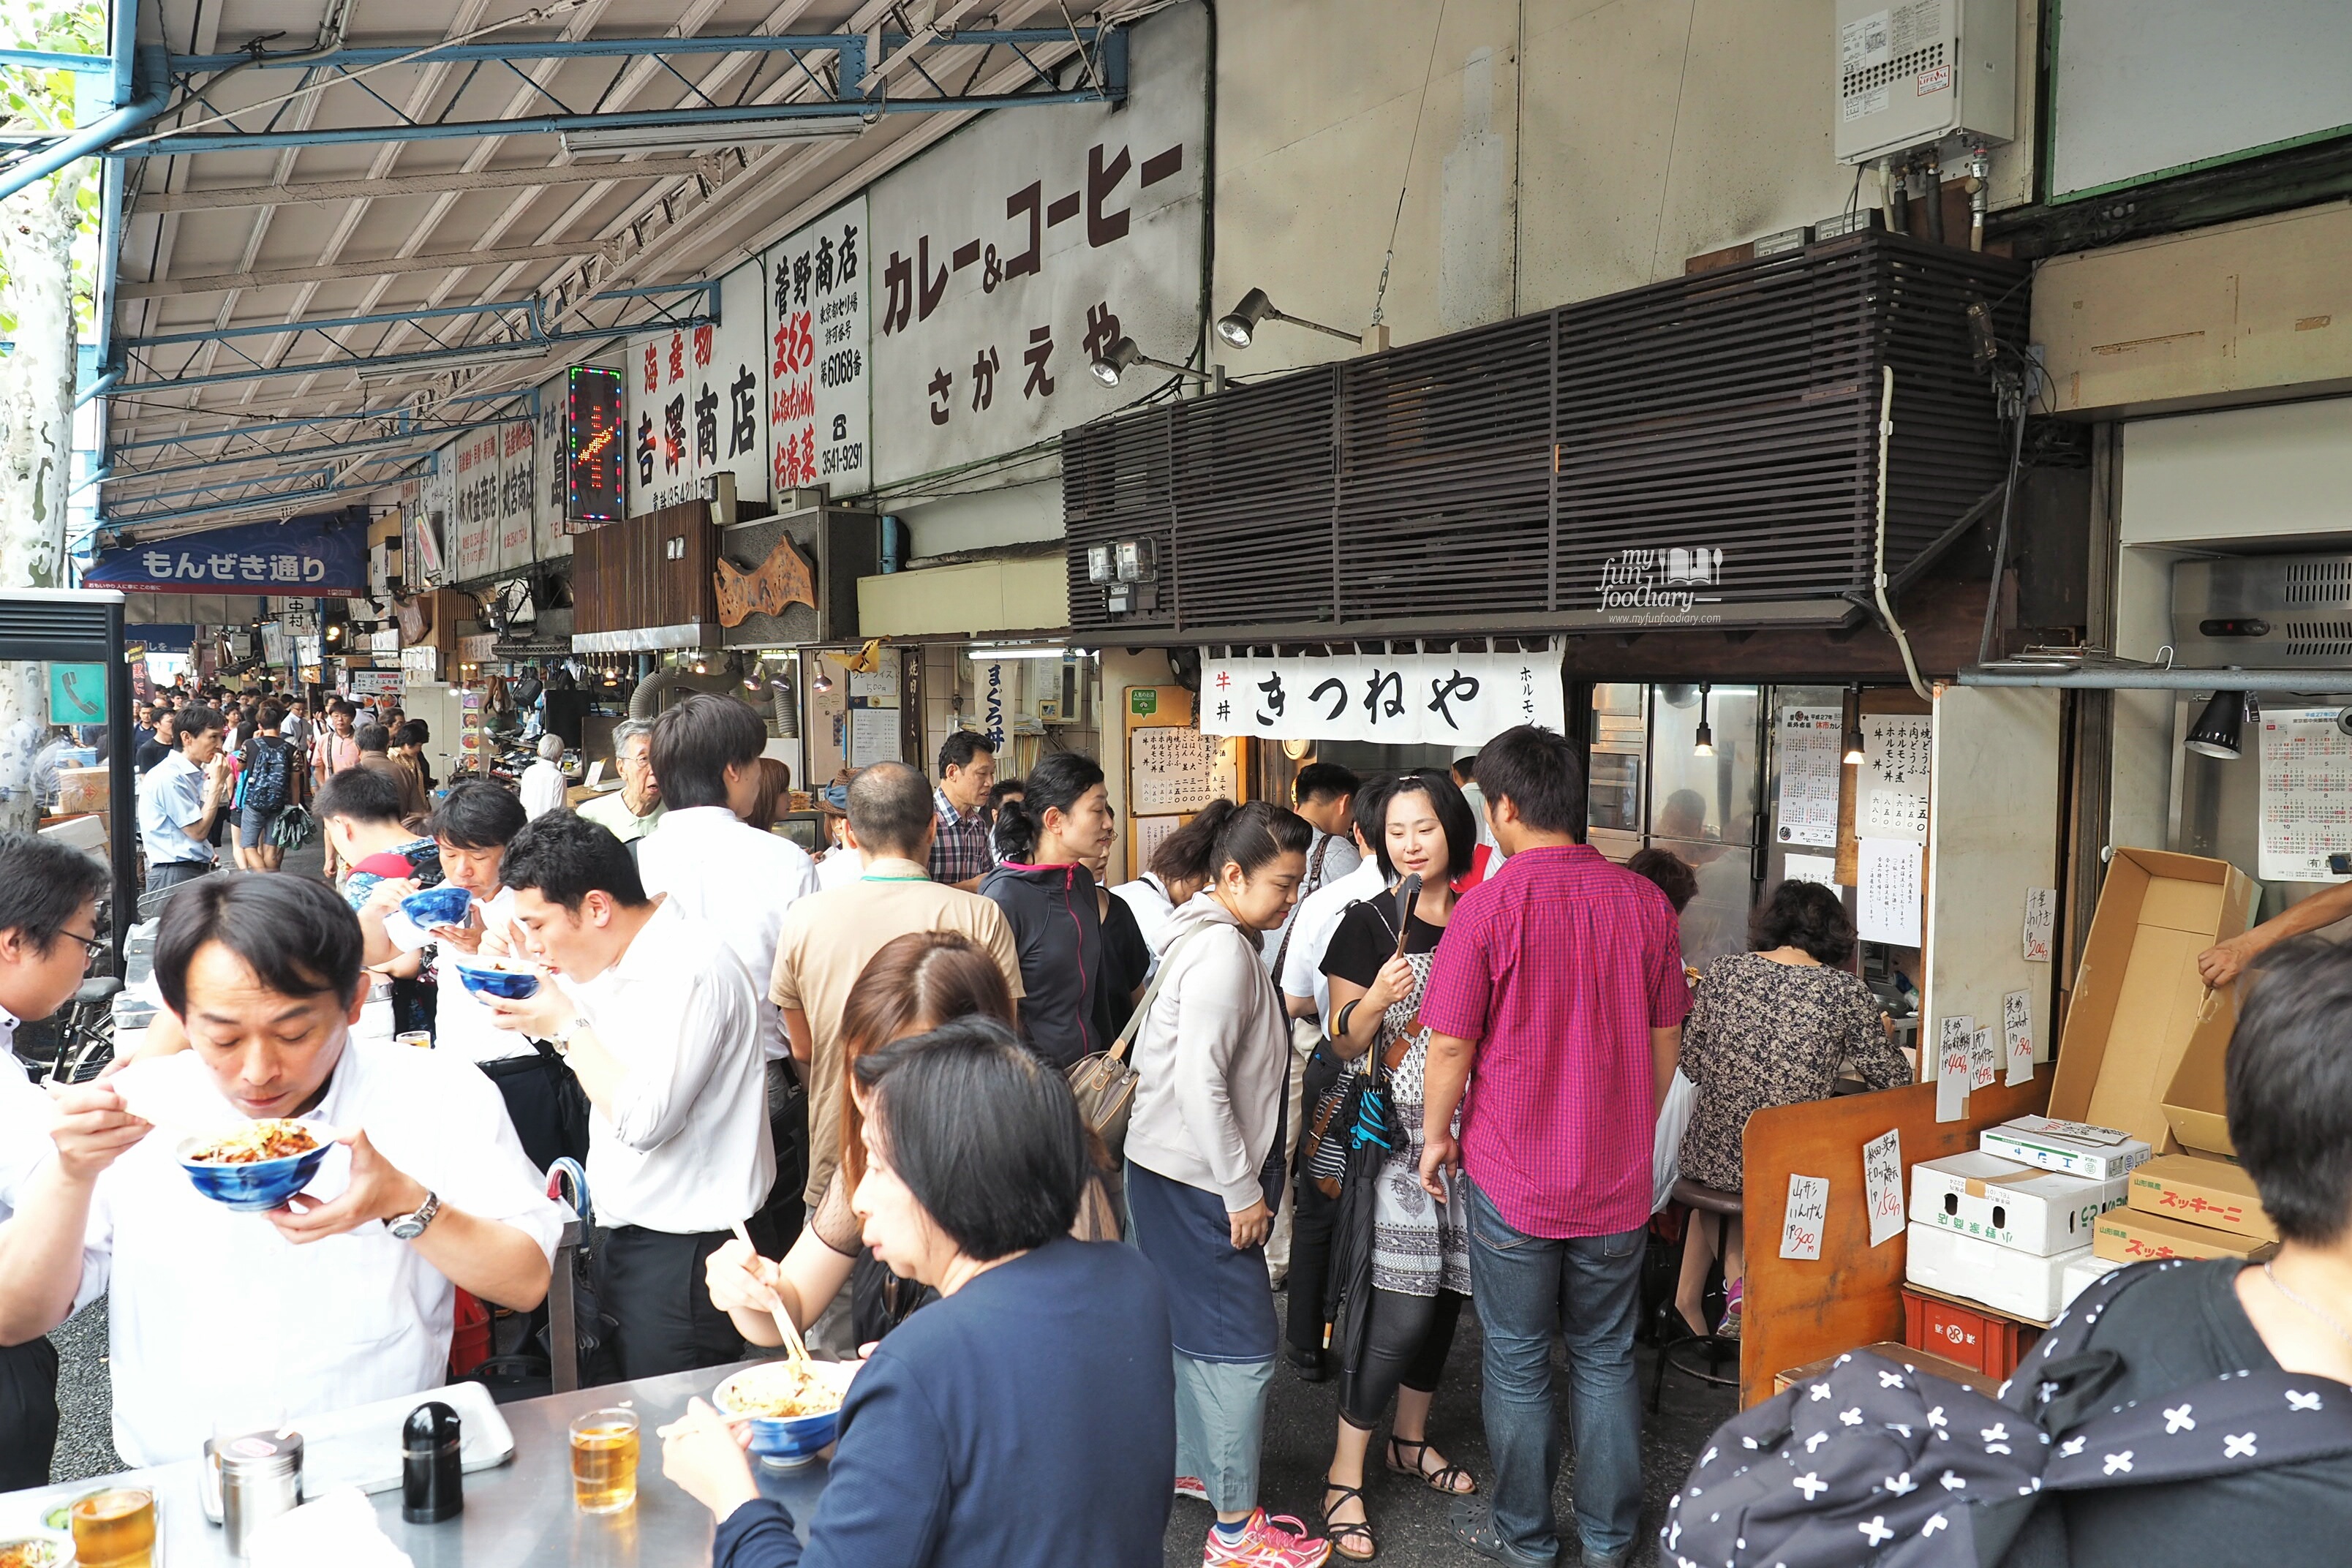 The way people enjoying some food from the food stall at Tsukiji Market by Myfunfoodiary